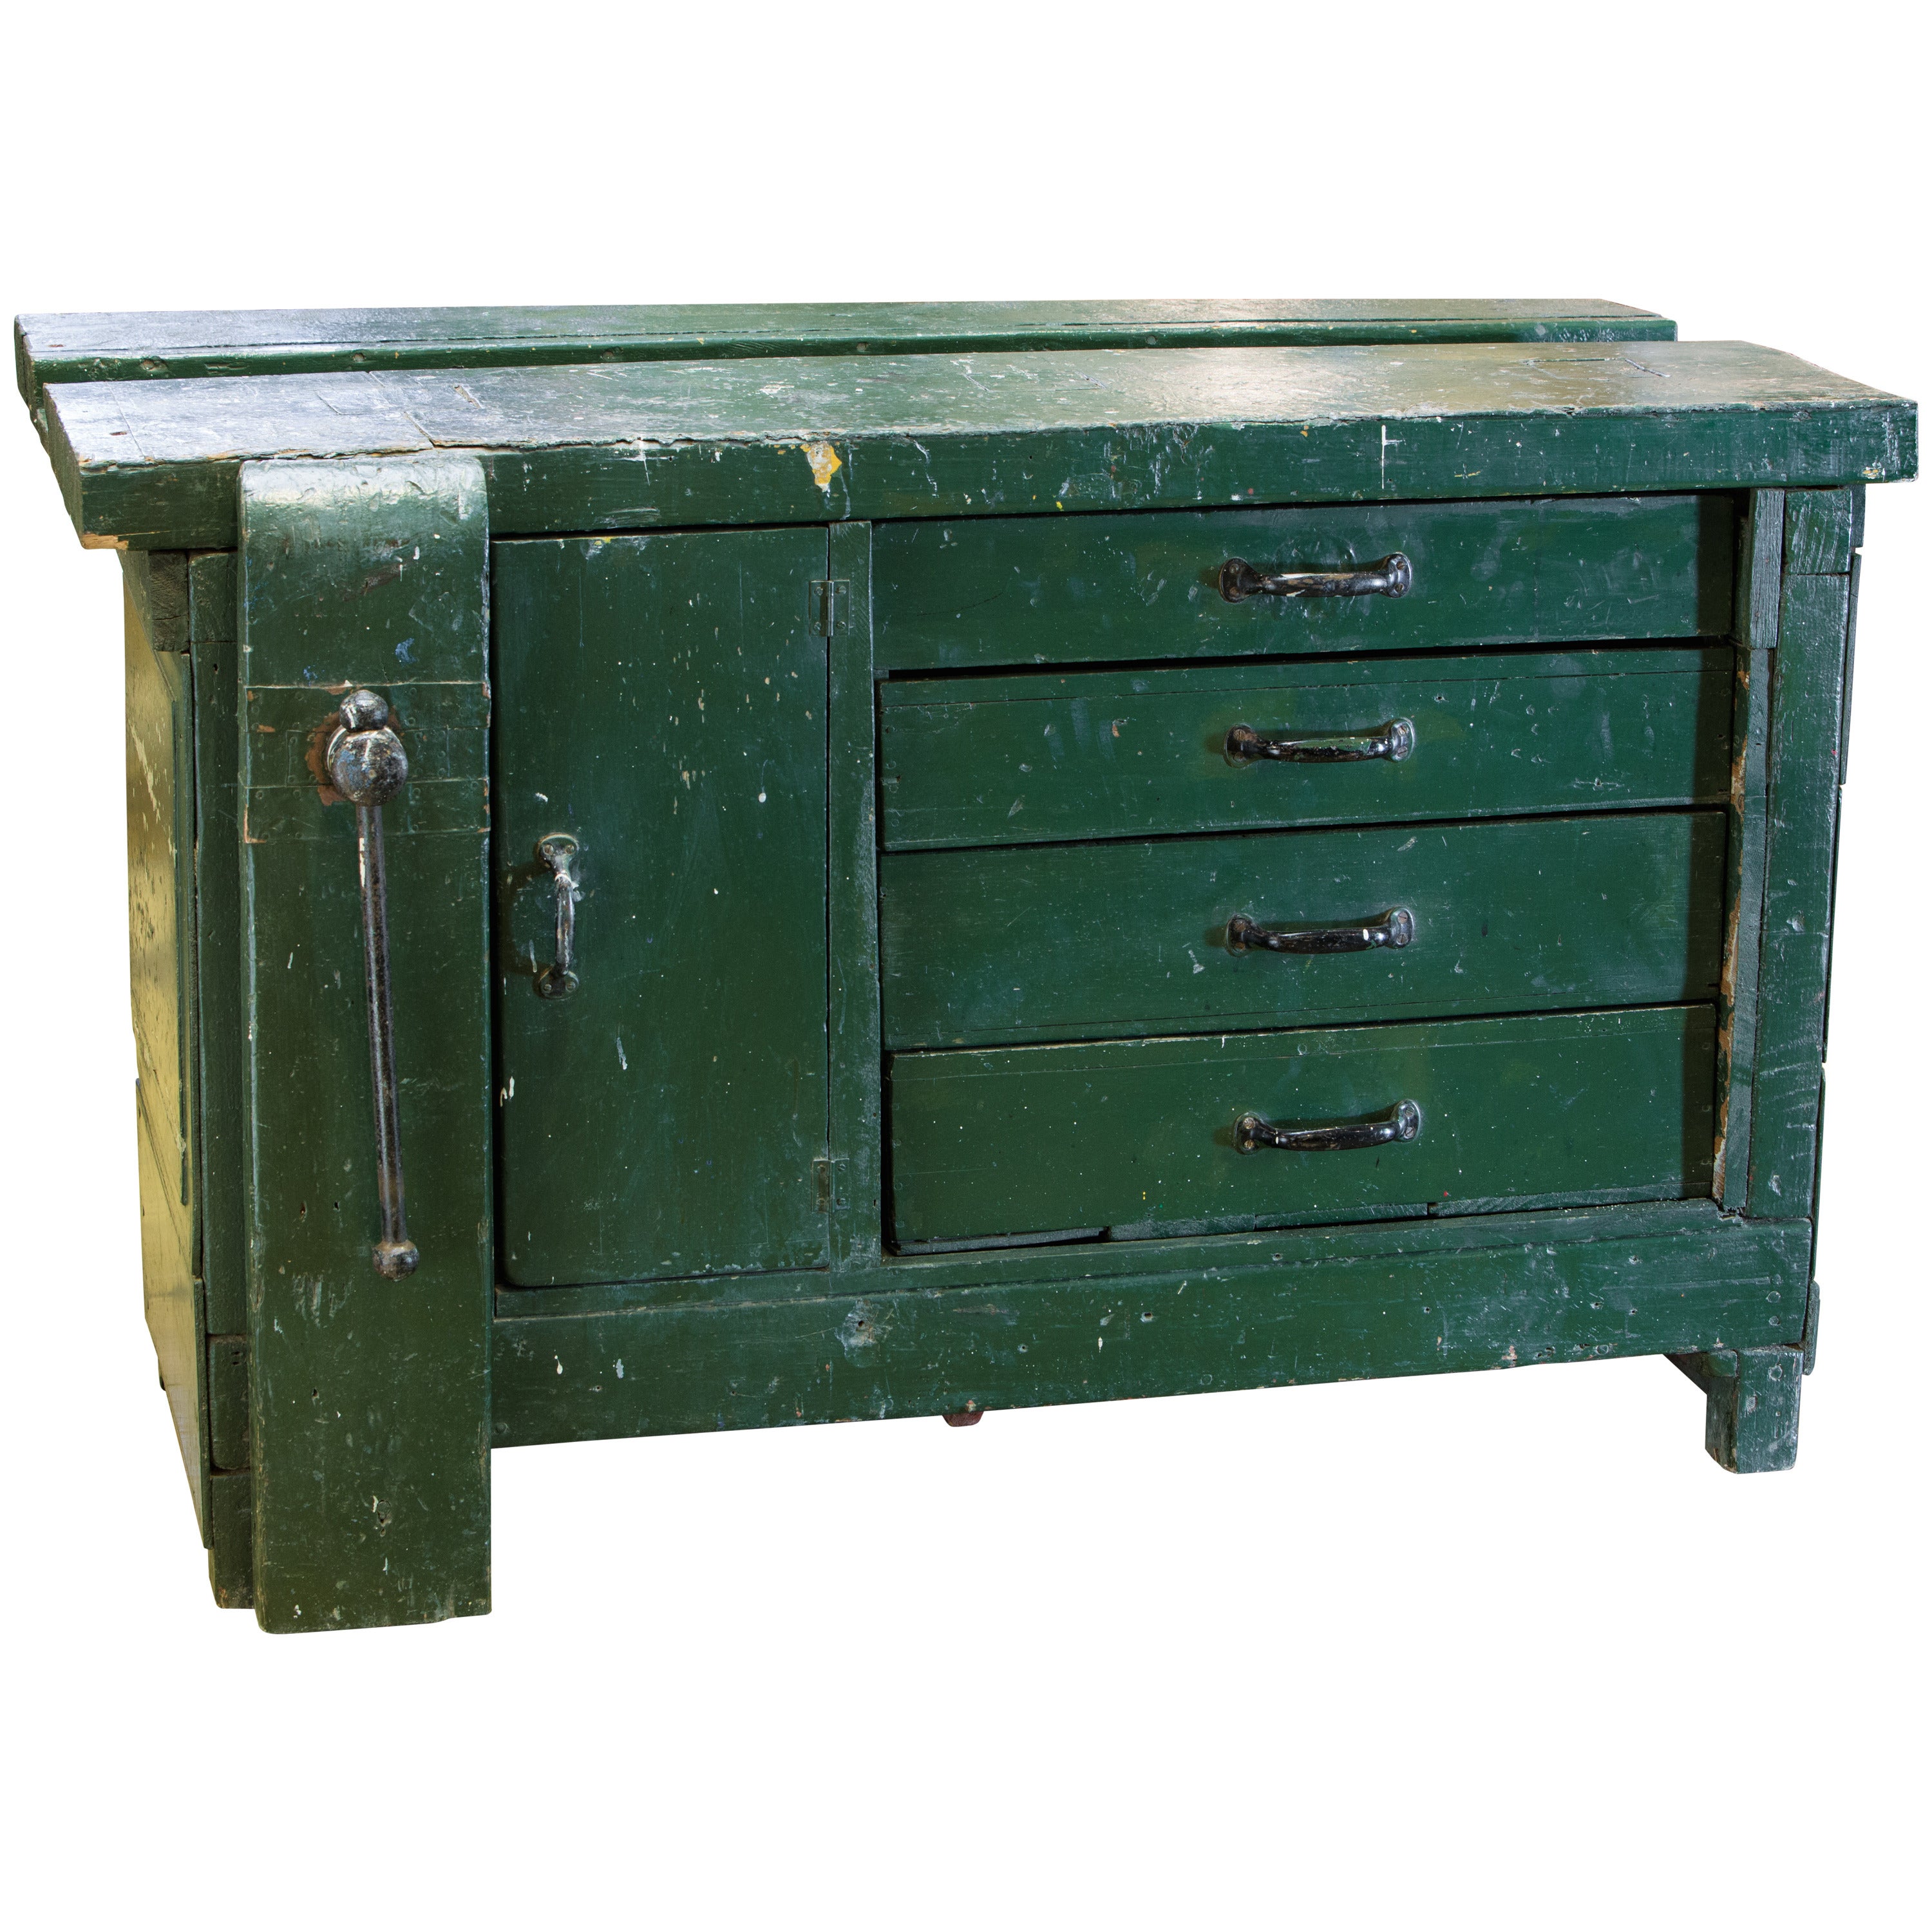 Vintage Green Belgian Industrial Work Bench with Drawers, circa 1920